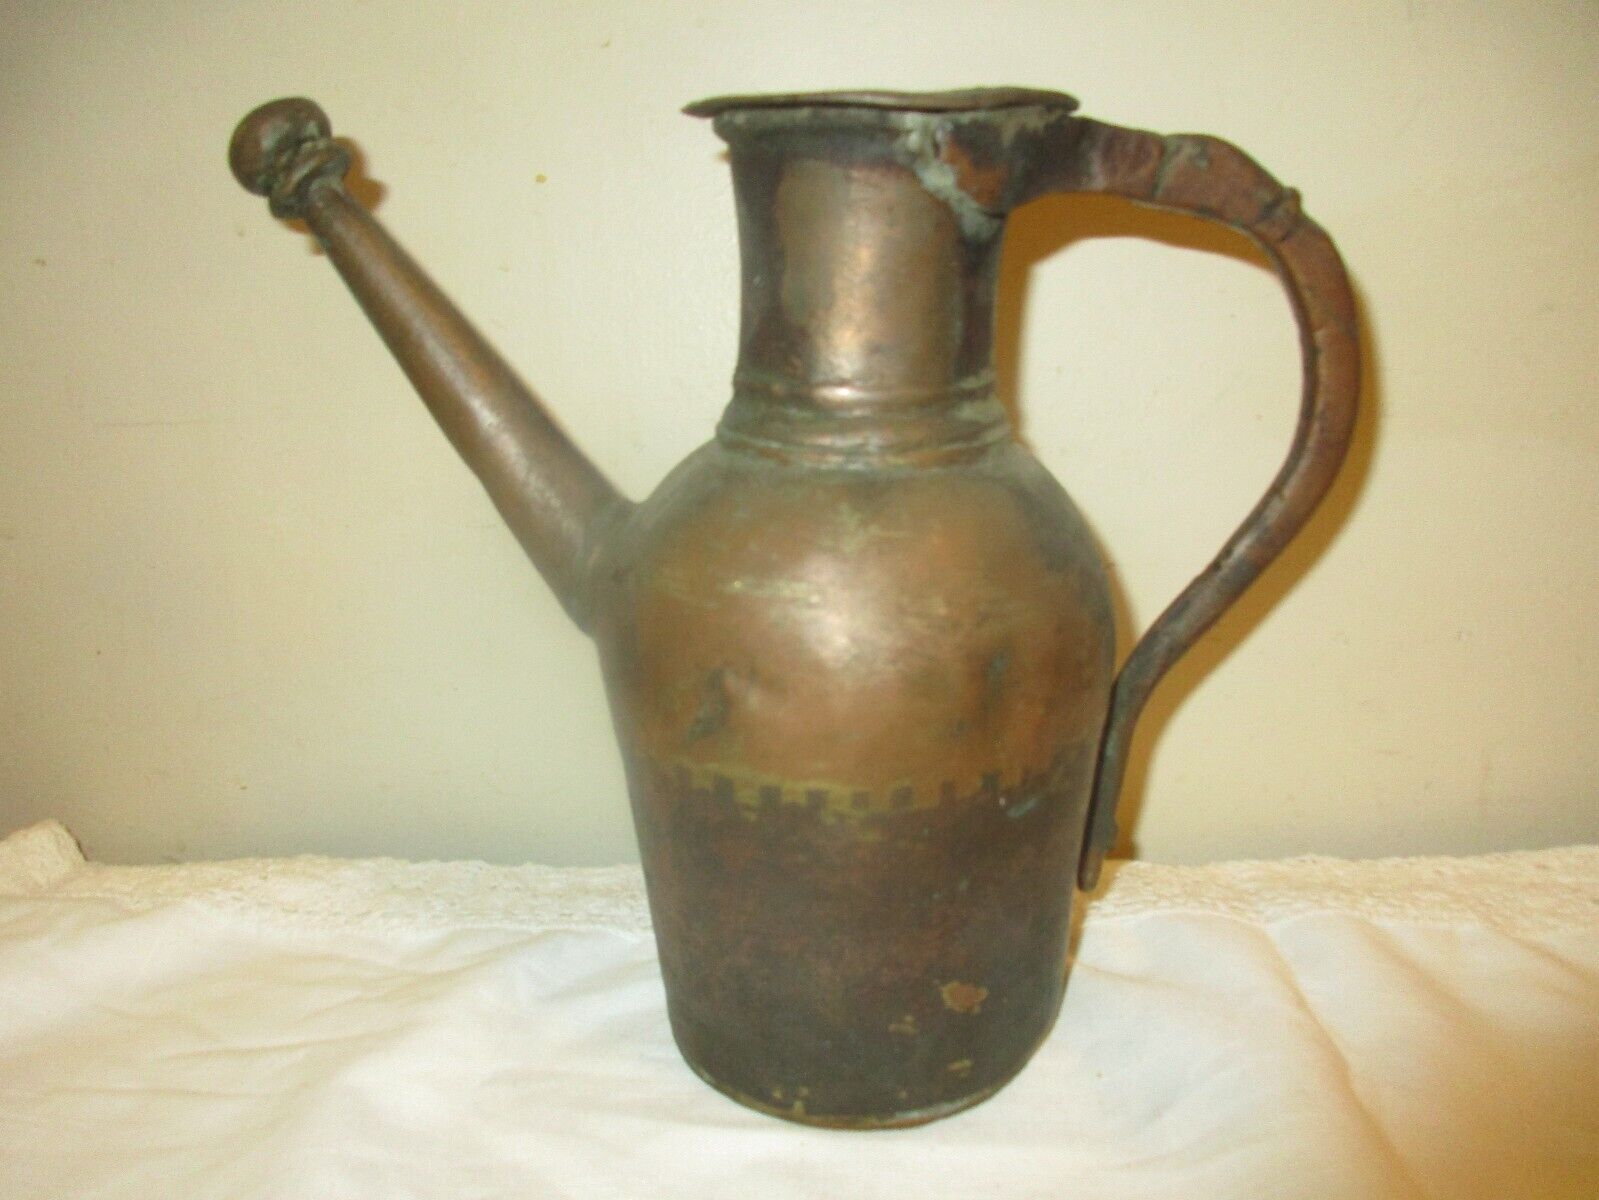 ANTIQUE HANDCRAFTED BRASS METAL WATER PITCHER, VERY EARLY CRAFTSMANSHIP